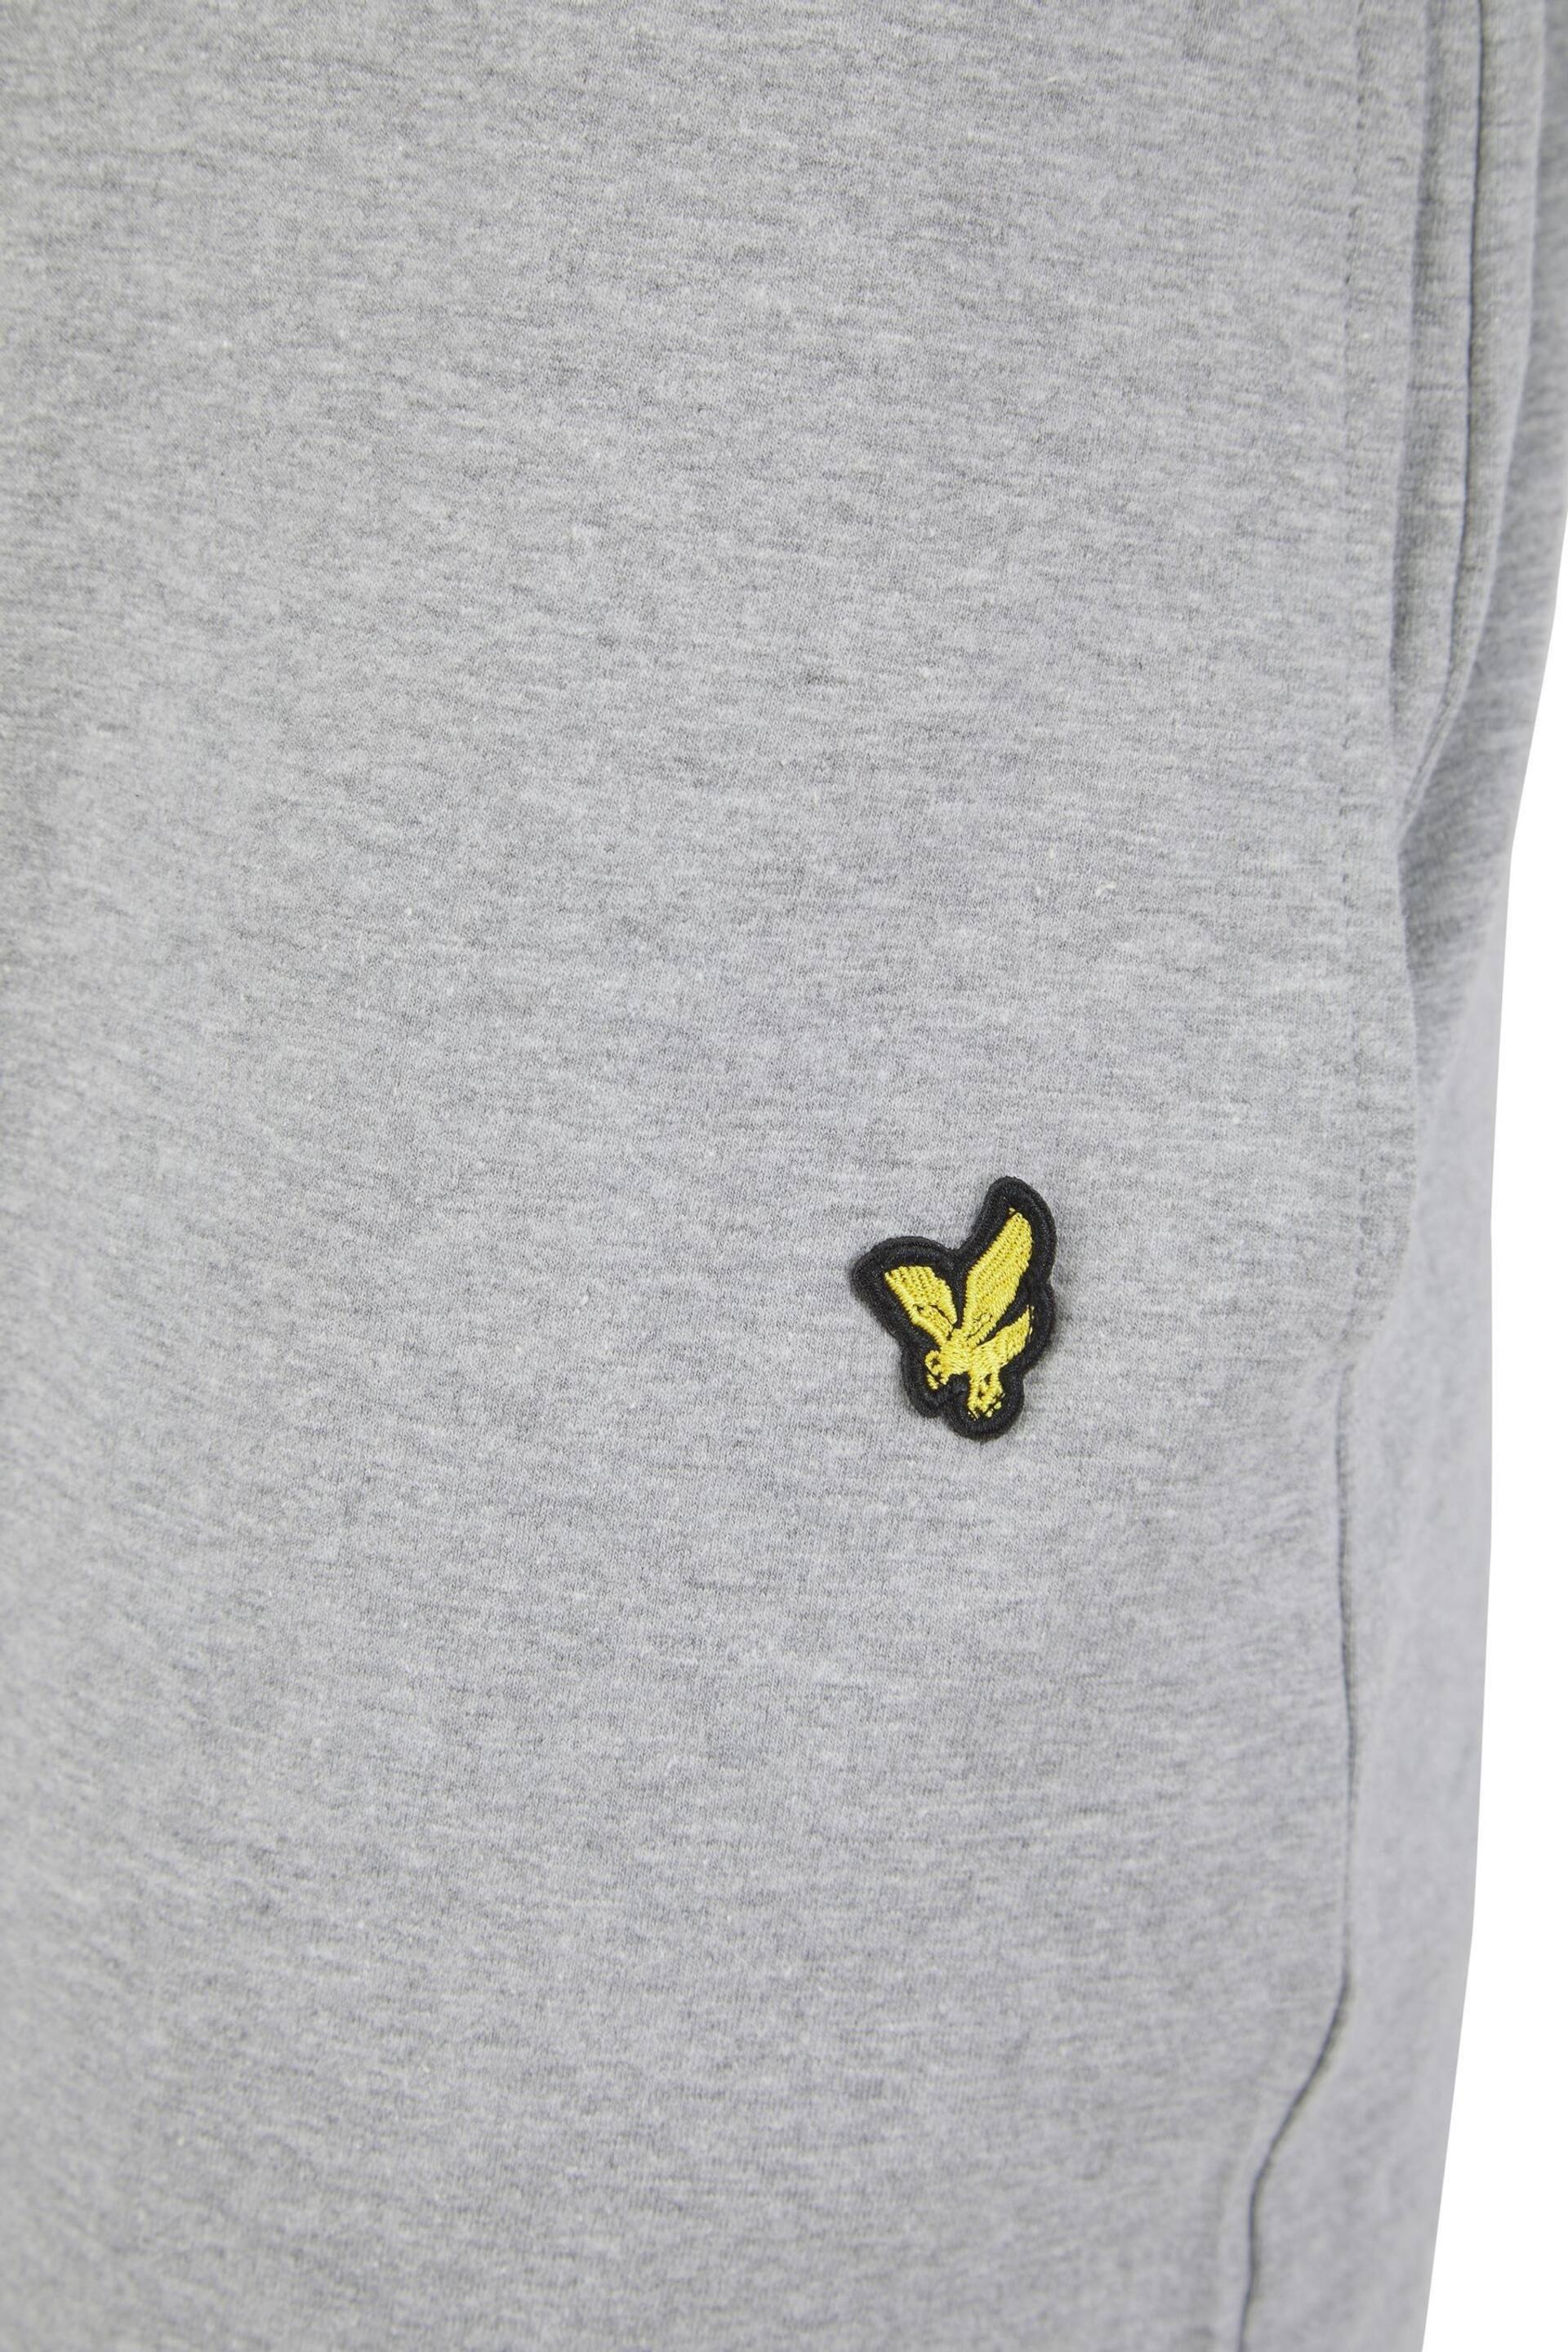 Lyle & Scott Grey Cash Top And Joggers Set - Image 6 of 6